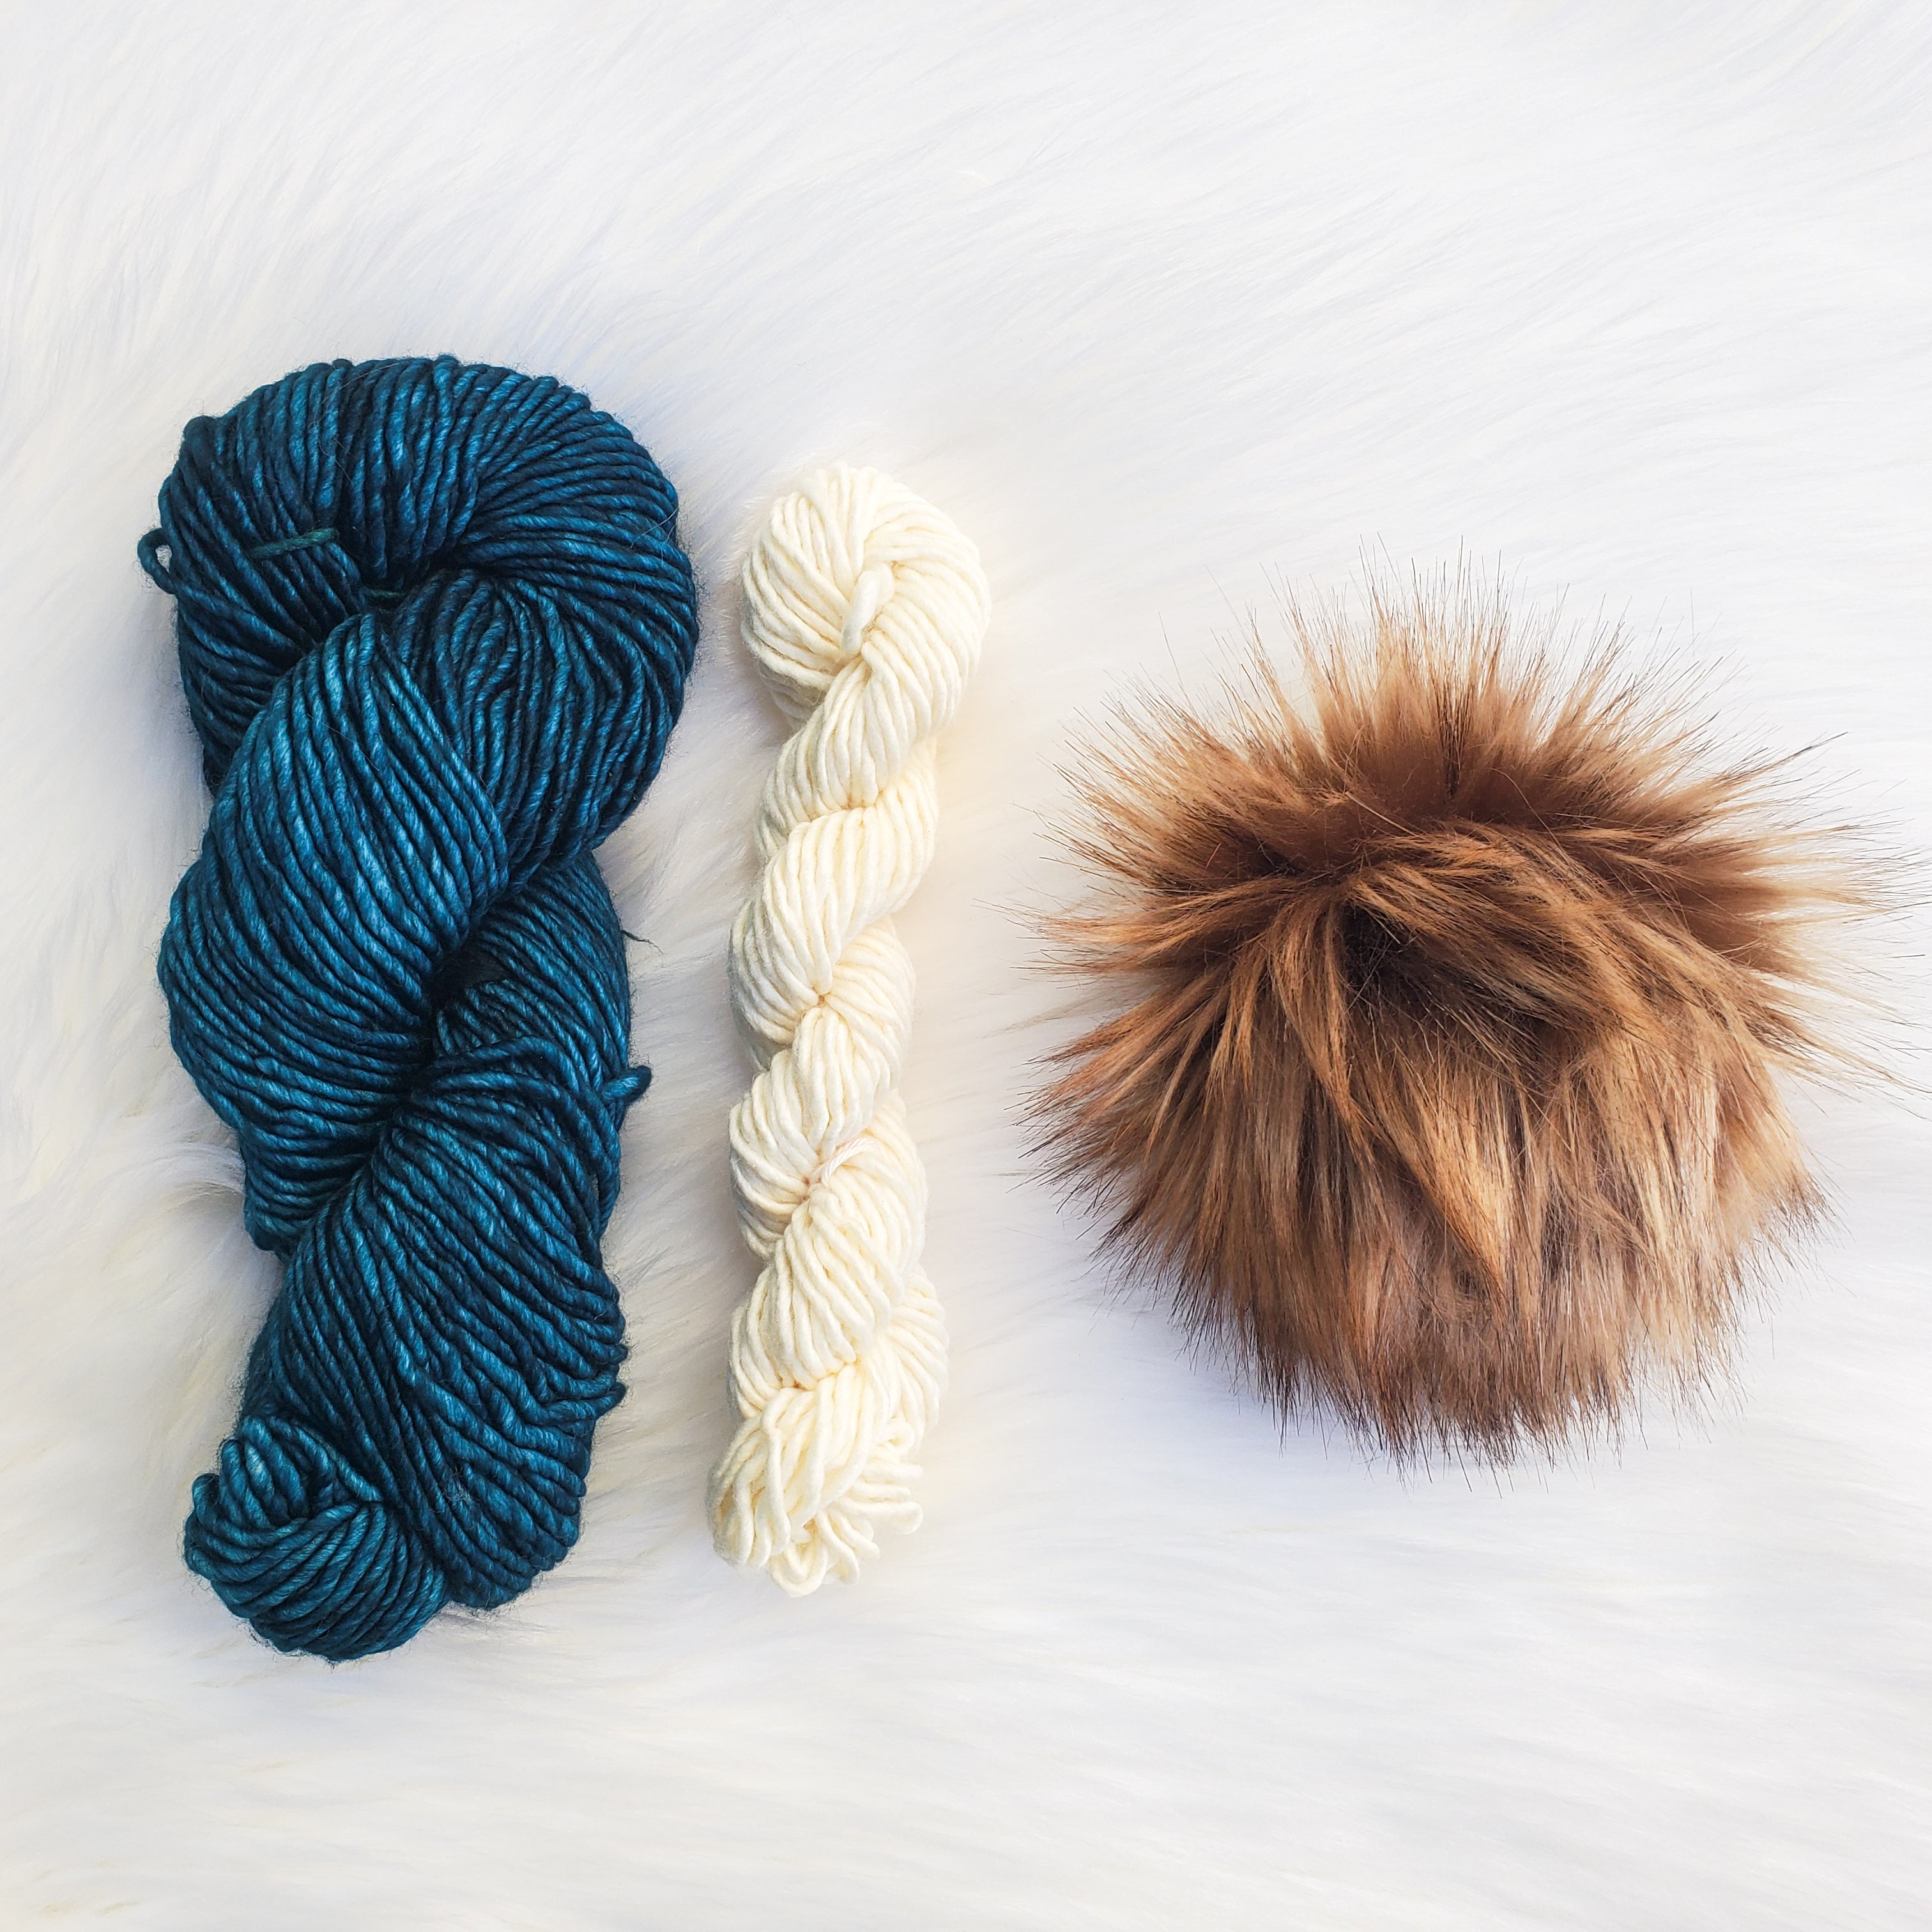 Teal Feather - Winter Winds Knitting Kit